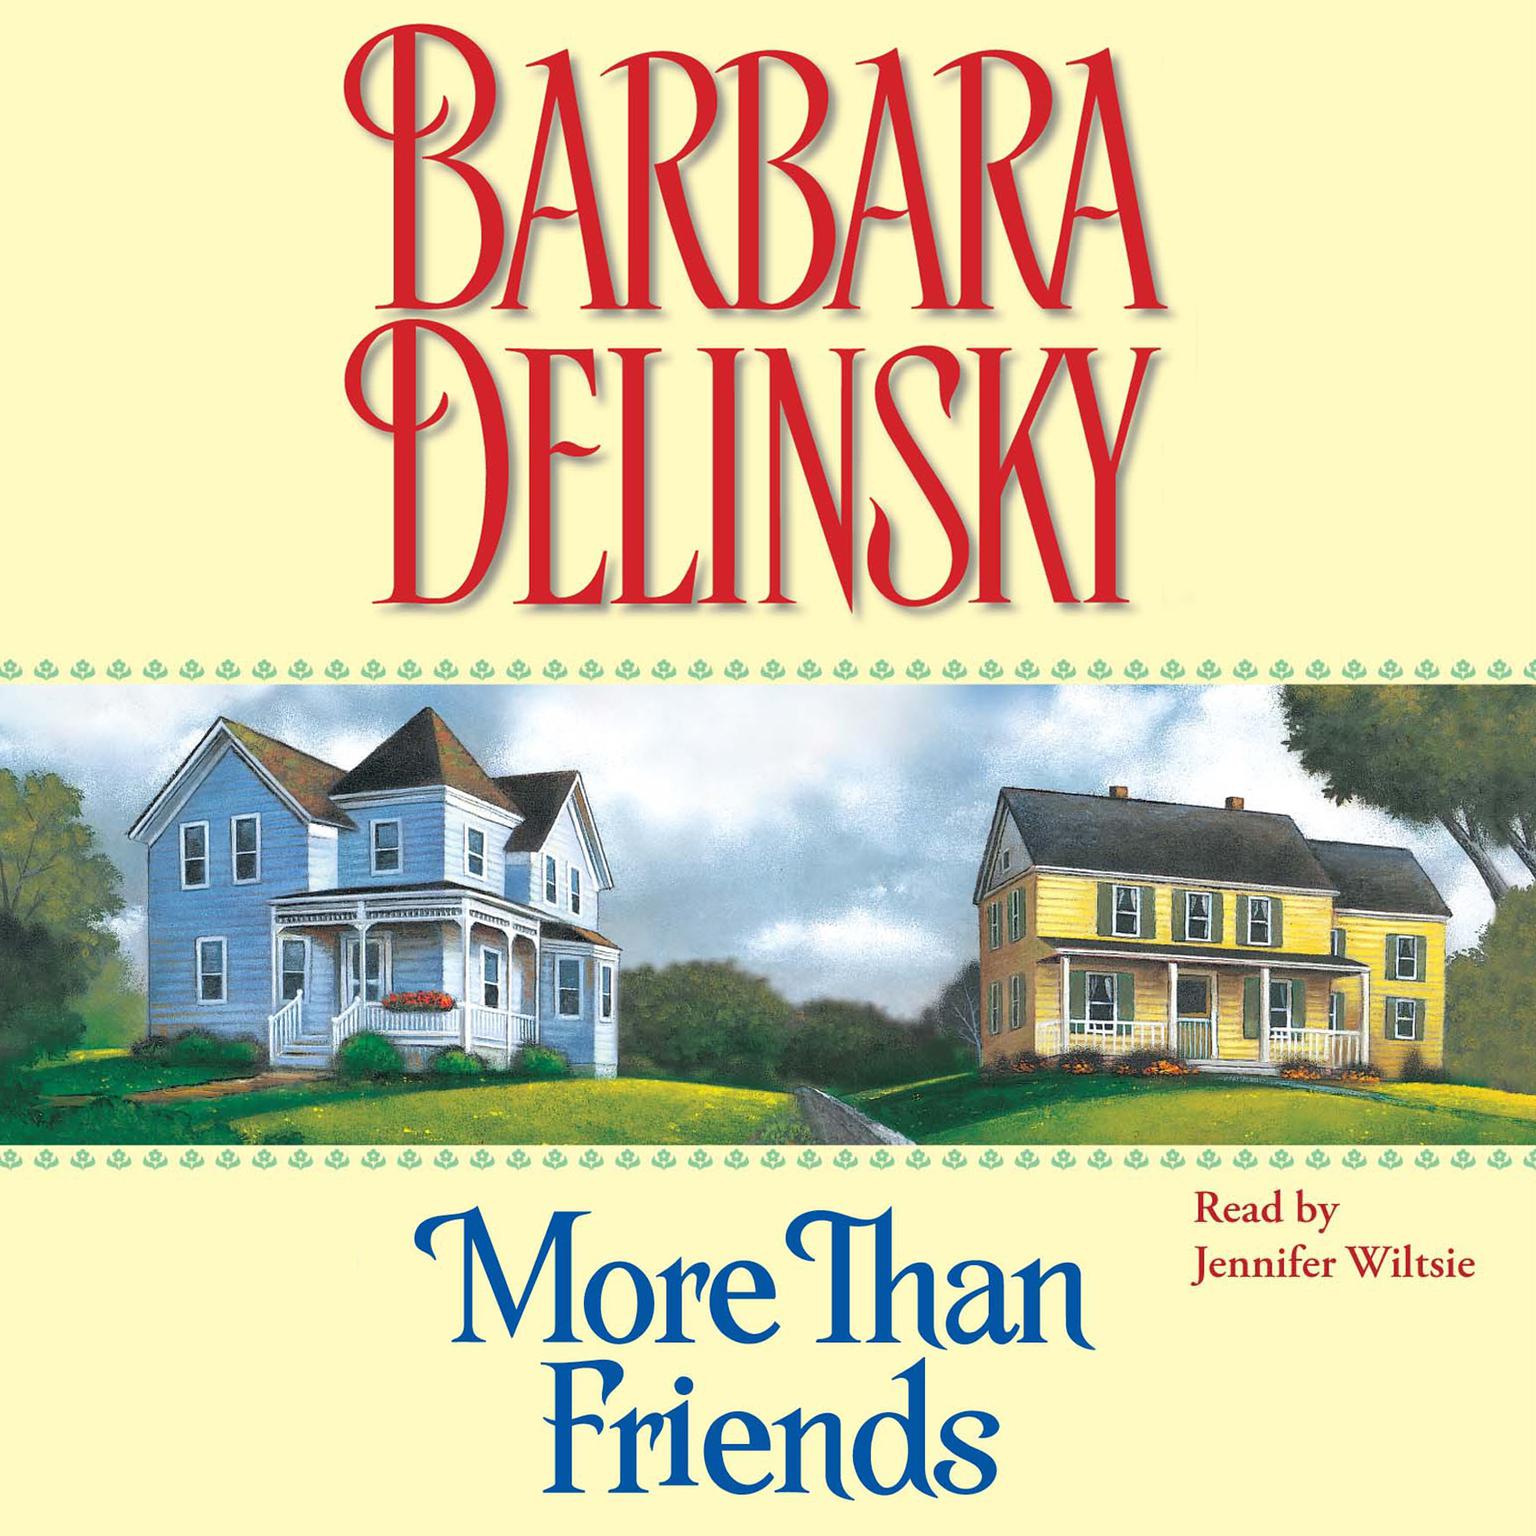 More Than Friends (Abridged) Audiobook, by Barbara Delinsky